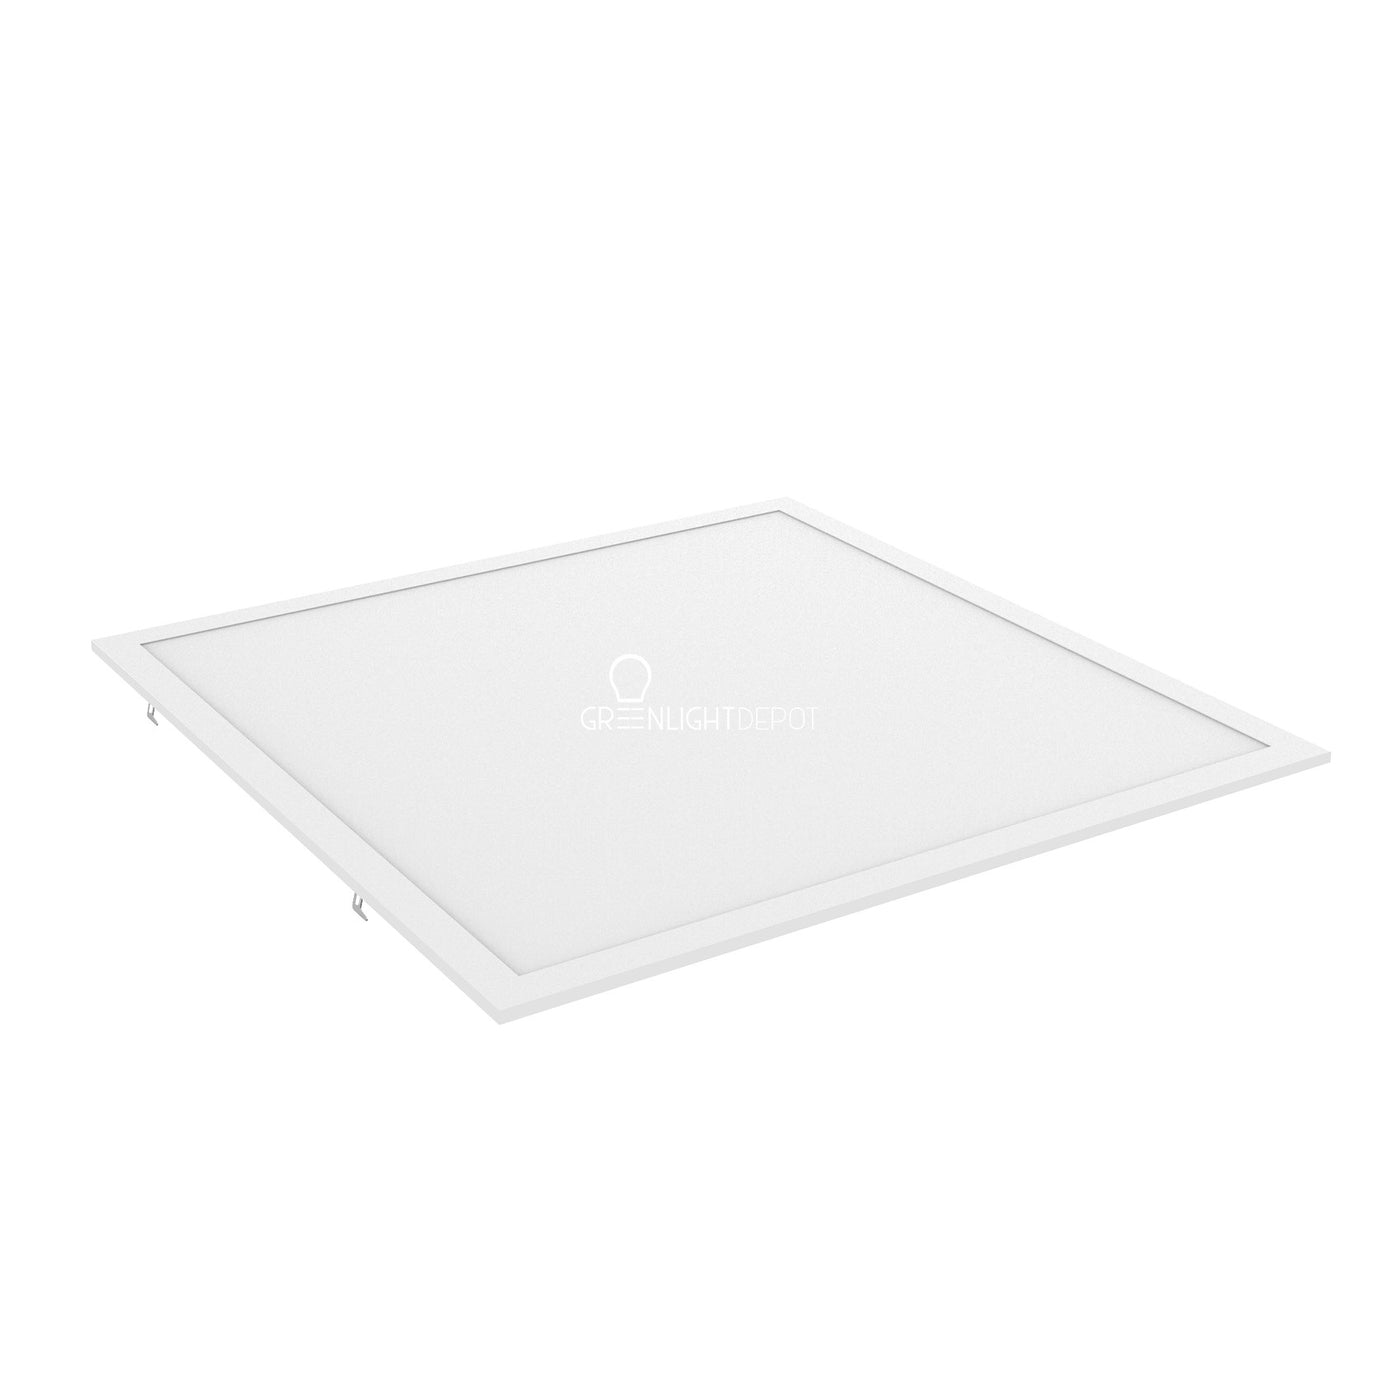 2' x 2' Foot, 4400 Lumens, LED Panel Light - 40W - Backlit Panel - 110lm/w - (UL+DLC) - Dimmable